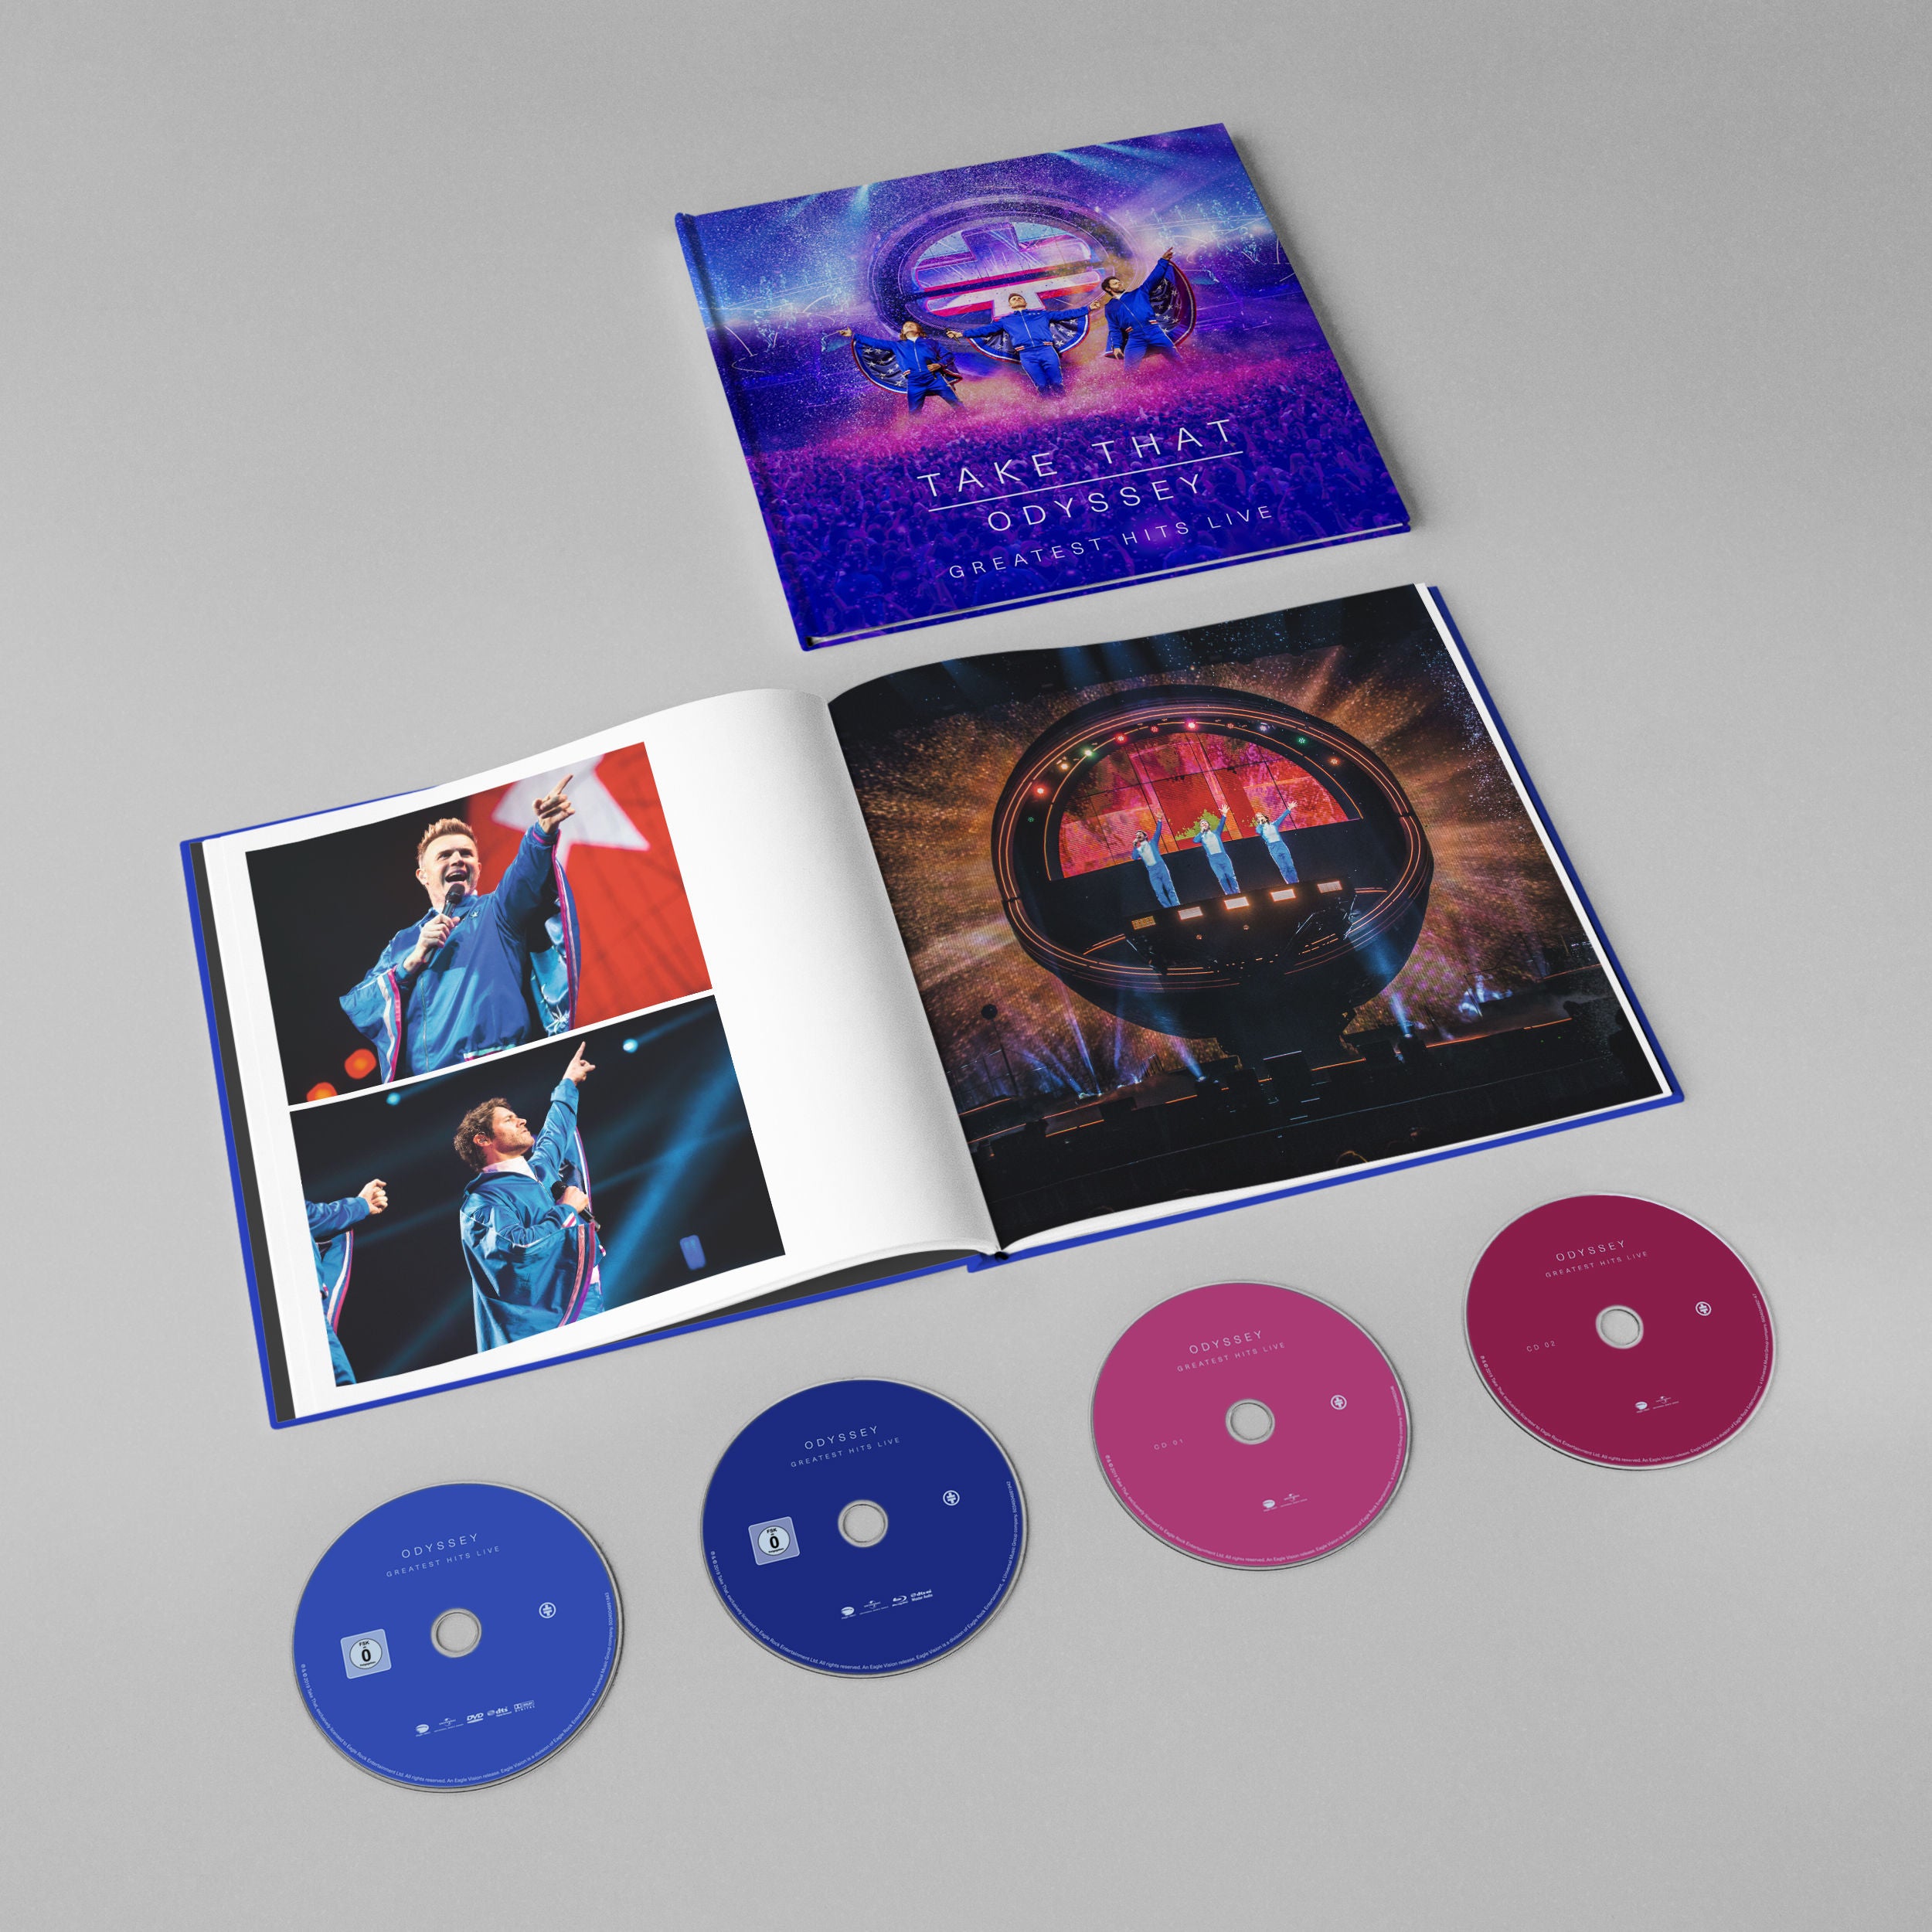 Odyssey - Greatest Hits Live: Limited Edition DVD, Blu-Ray + 2CD